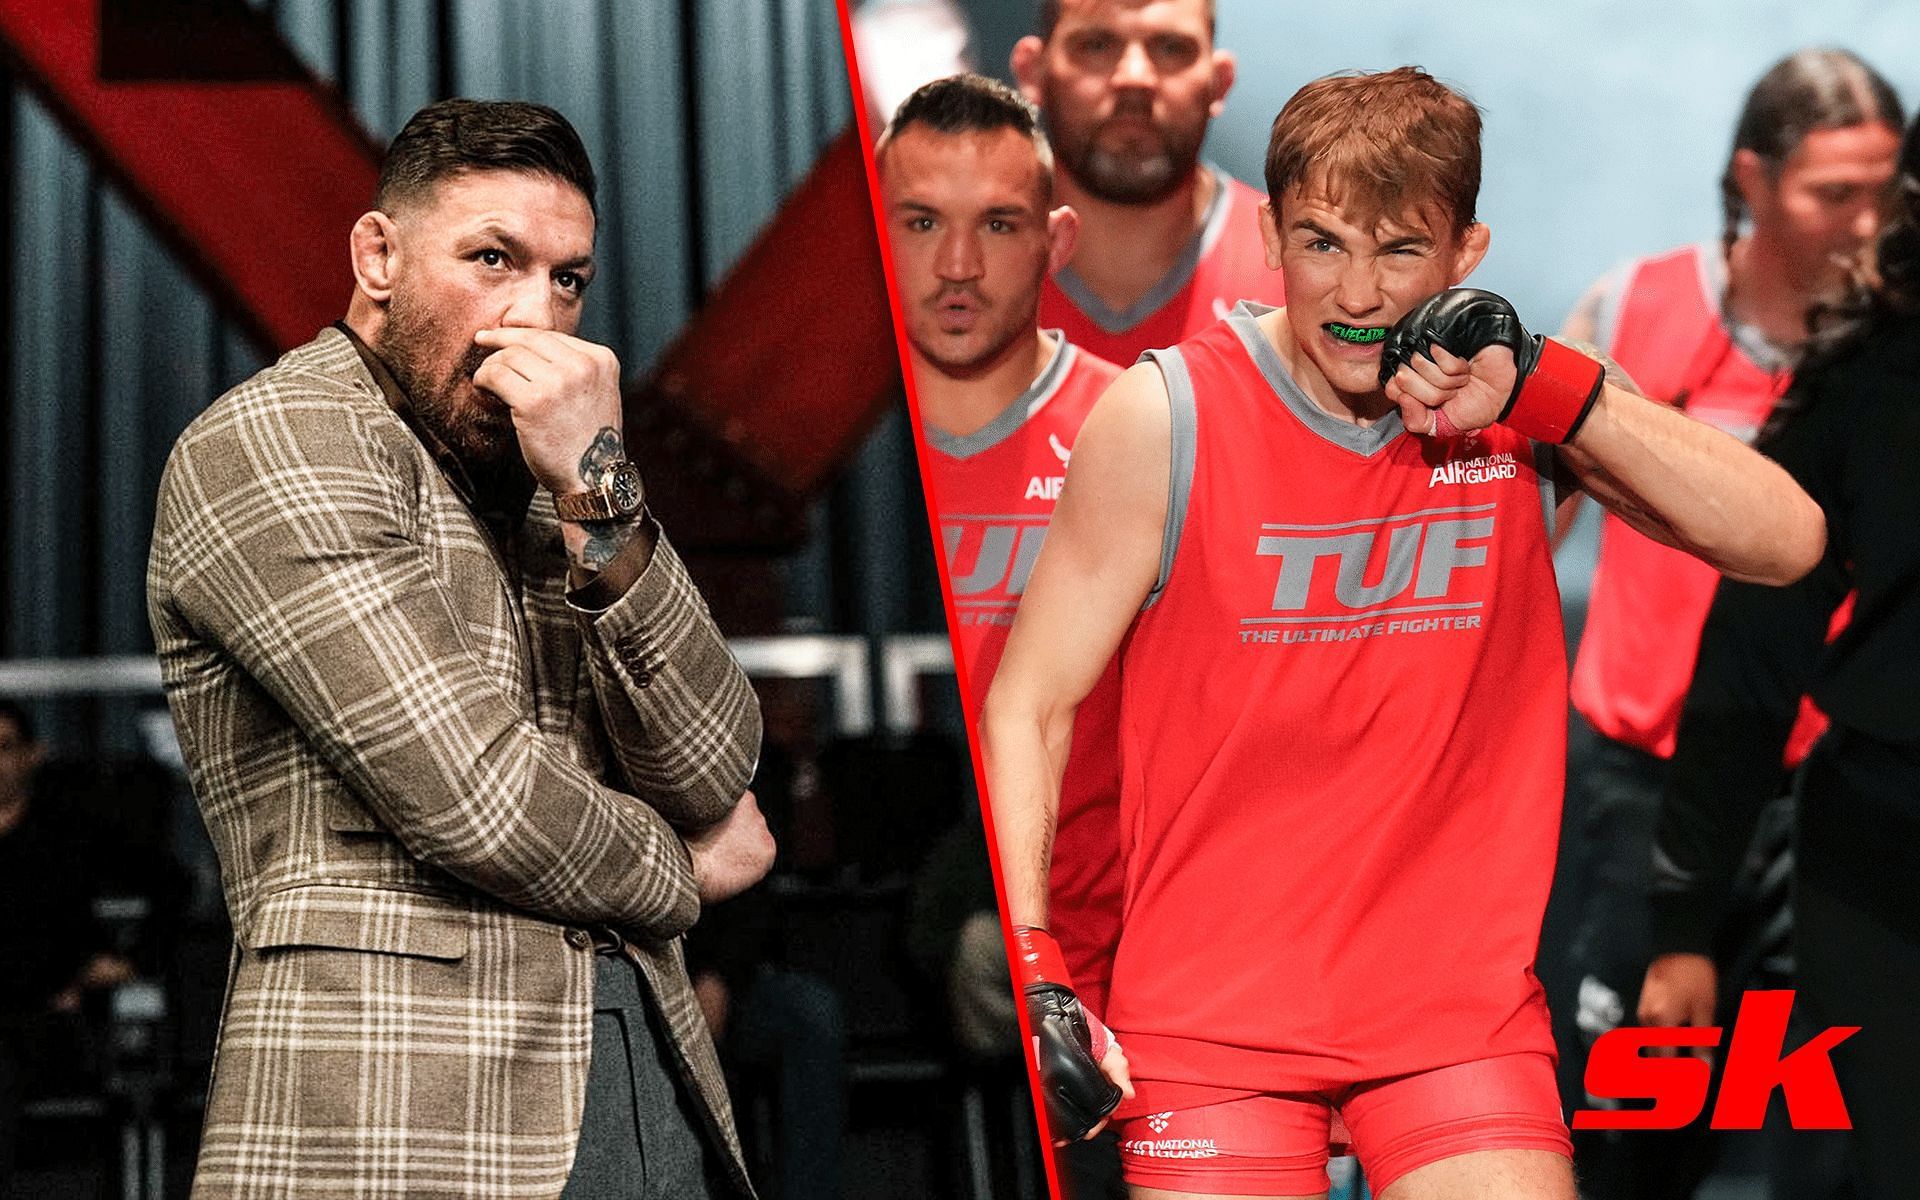 Conor McGregor (Left) and Cody Gibson (Right) [Images via: @ufc and @thenotoriousmma on Instagram]